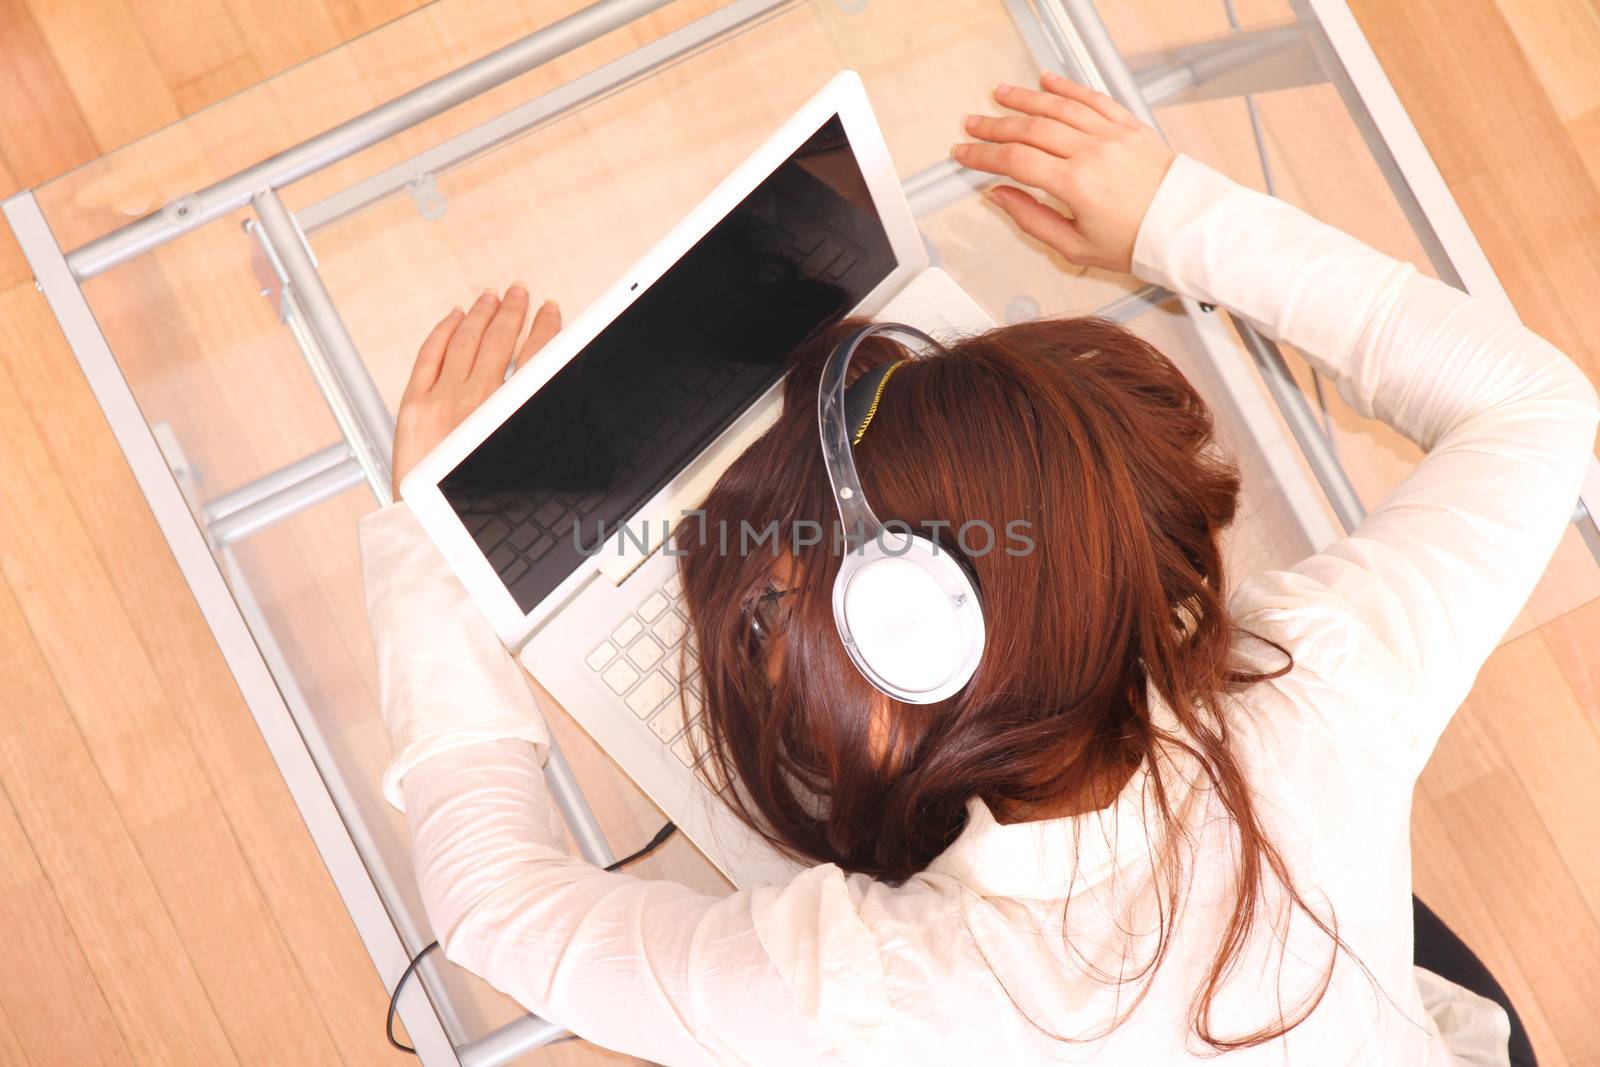 A woman sleeping on the Laptop.